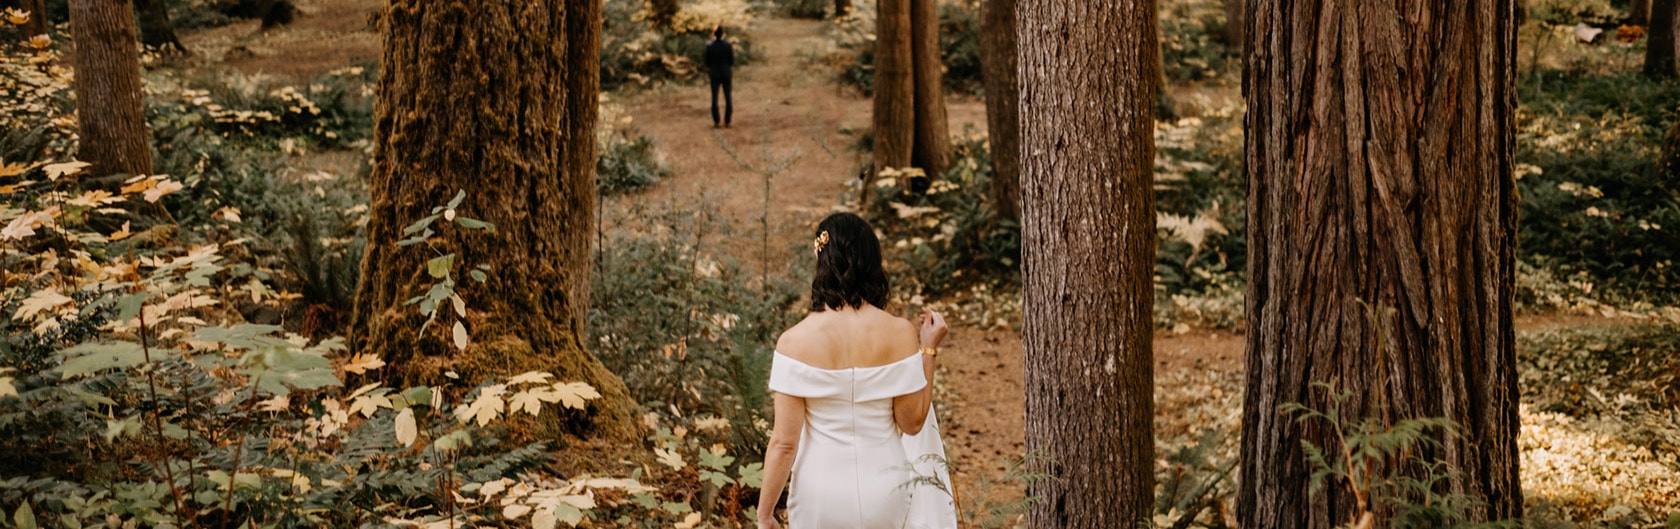 wedding photography second photographer guide image of bride and groom in forest